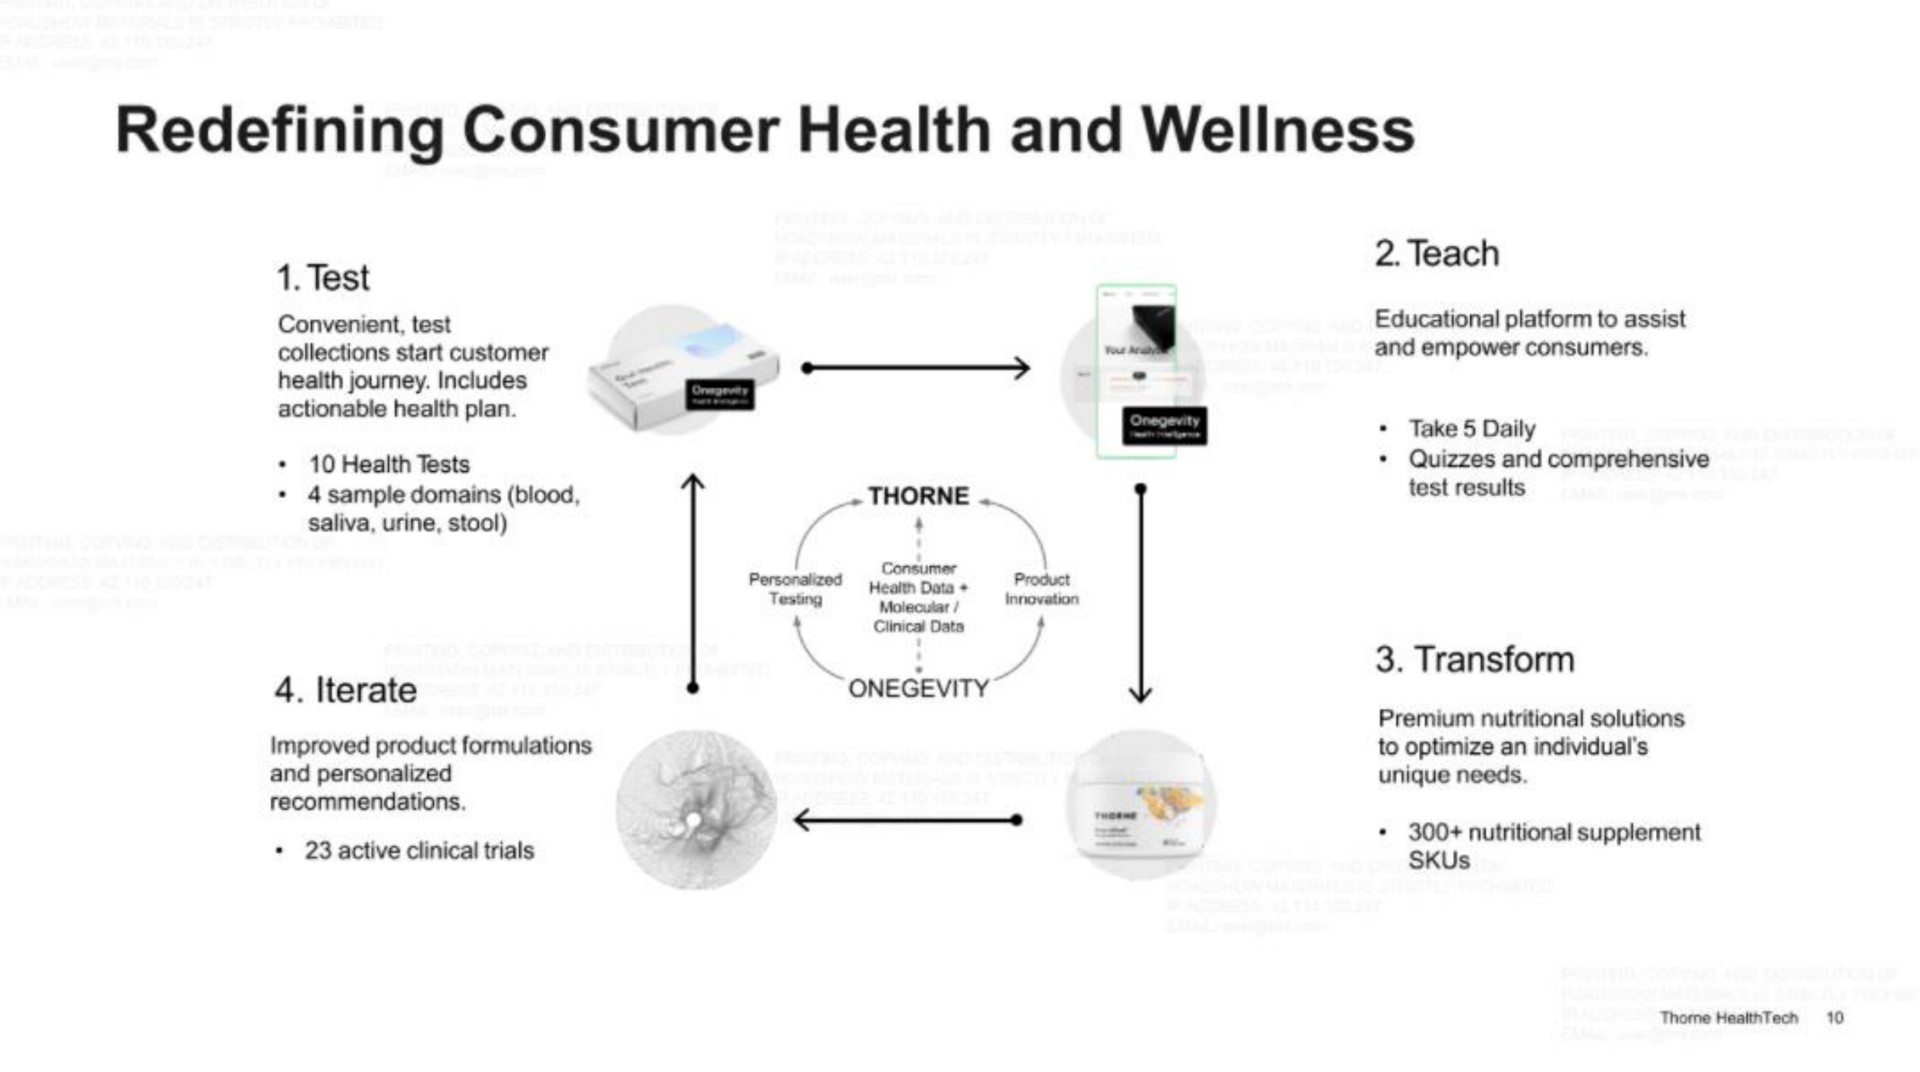 redefining consumer health and wellness | Thorne HealthTech